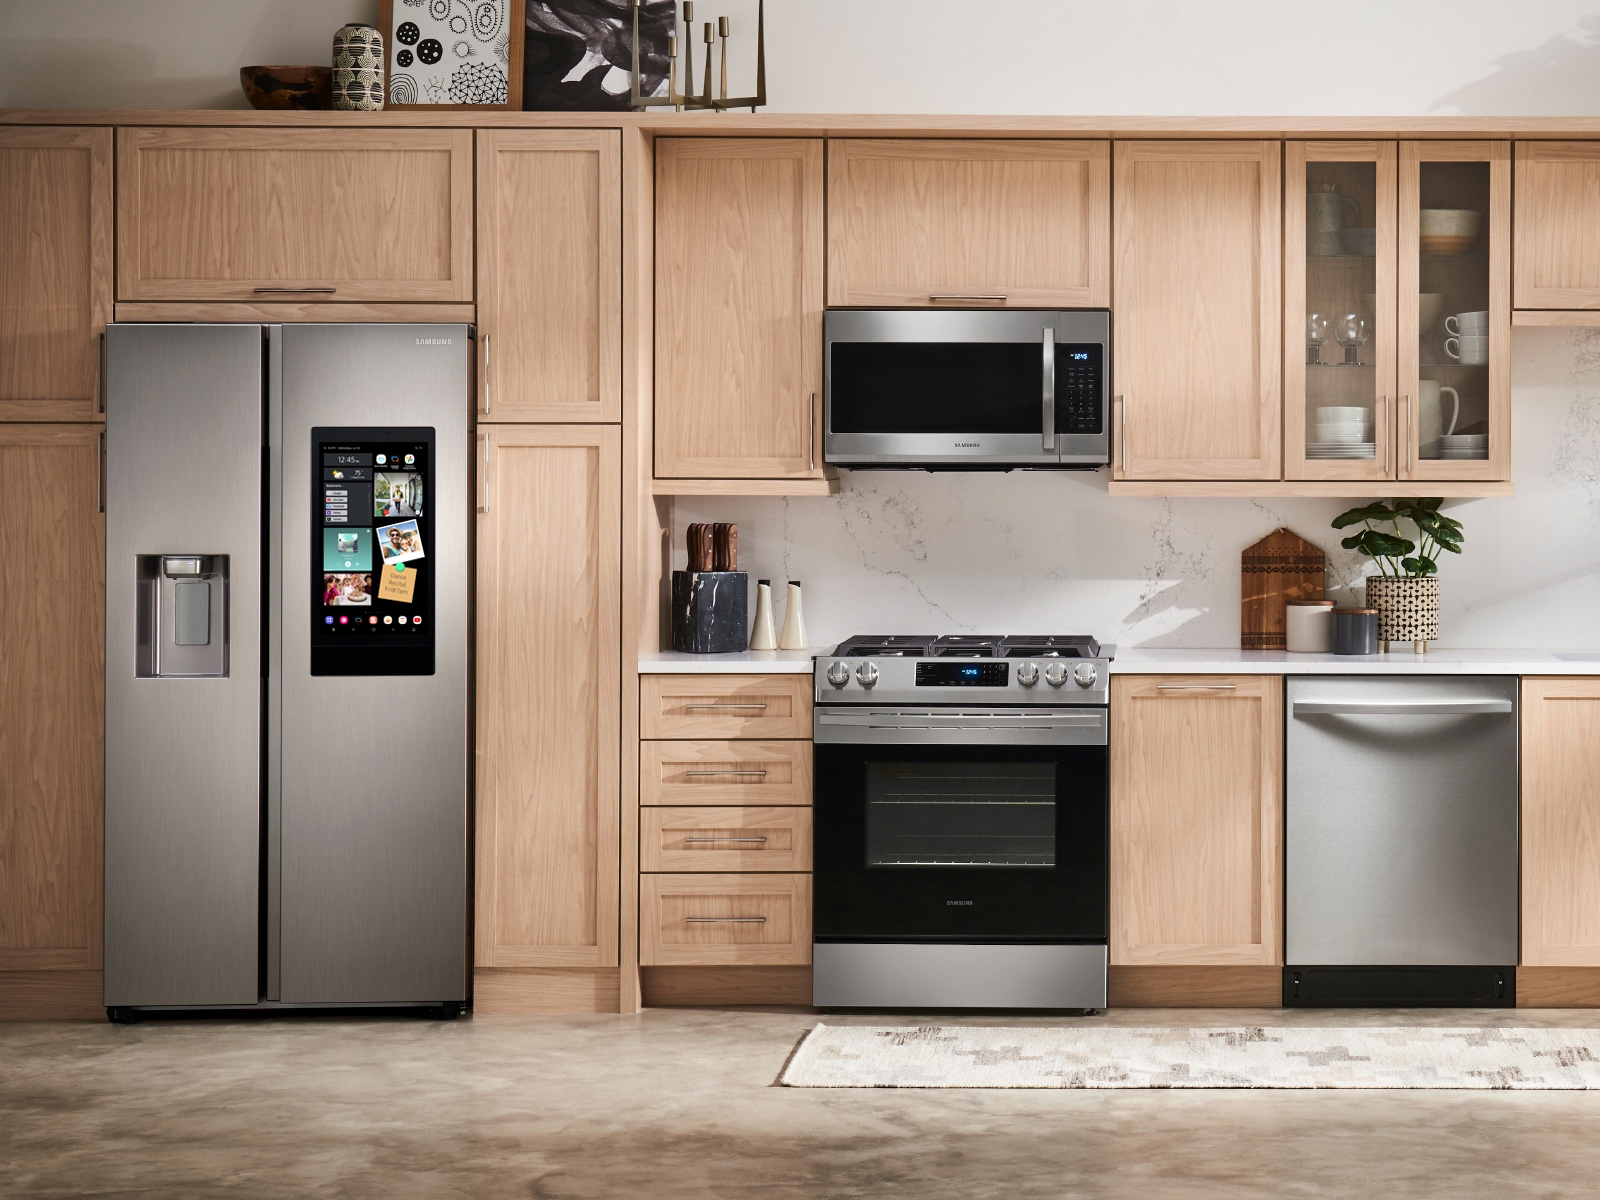 Thumbnail image of 22 cu. ft. Counter Depth Side-by-Side Refrigerator with Touch Screen Family Hub&trade; in Stainless Steel